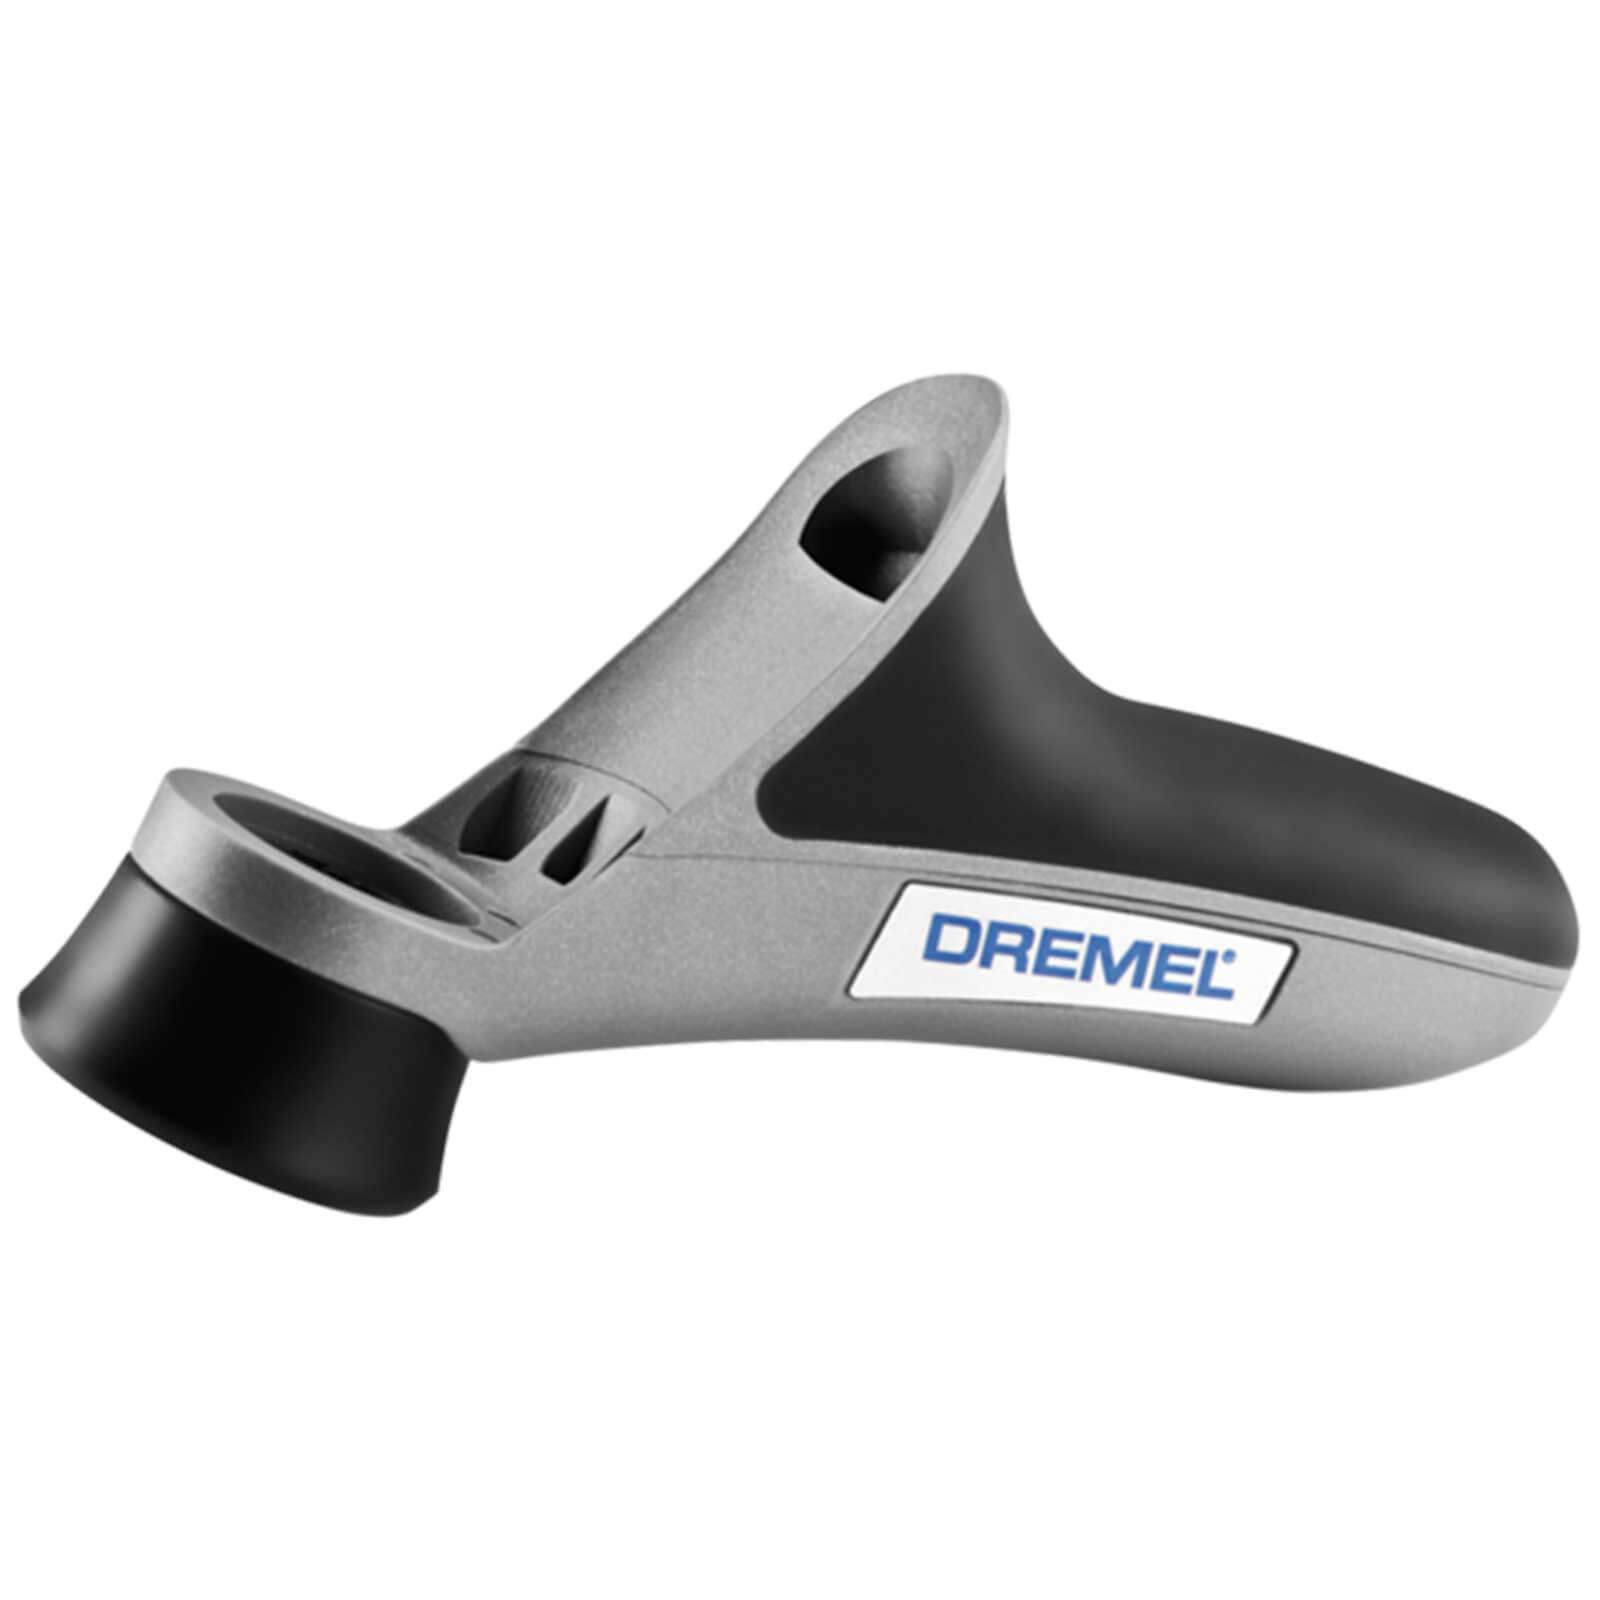 Image of Dremel 577 Rotary Multi Tool Detailers Grip Attachment